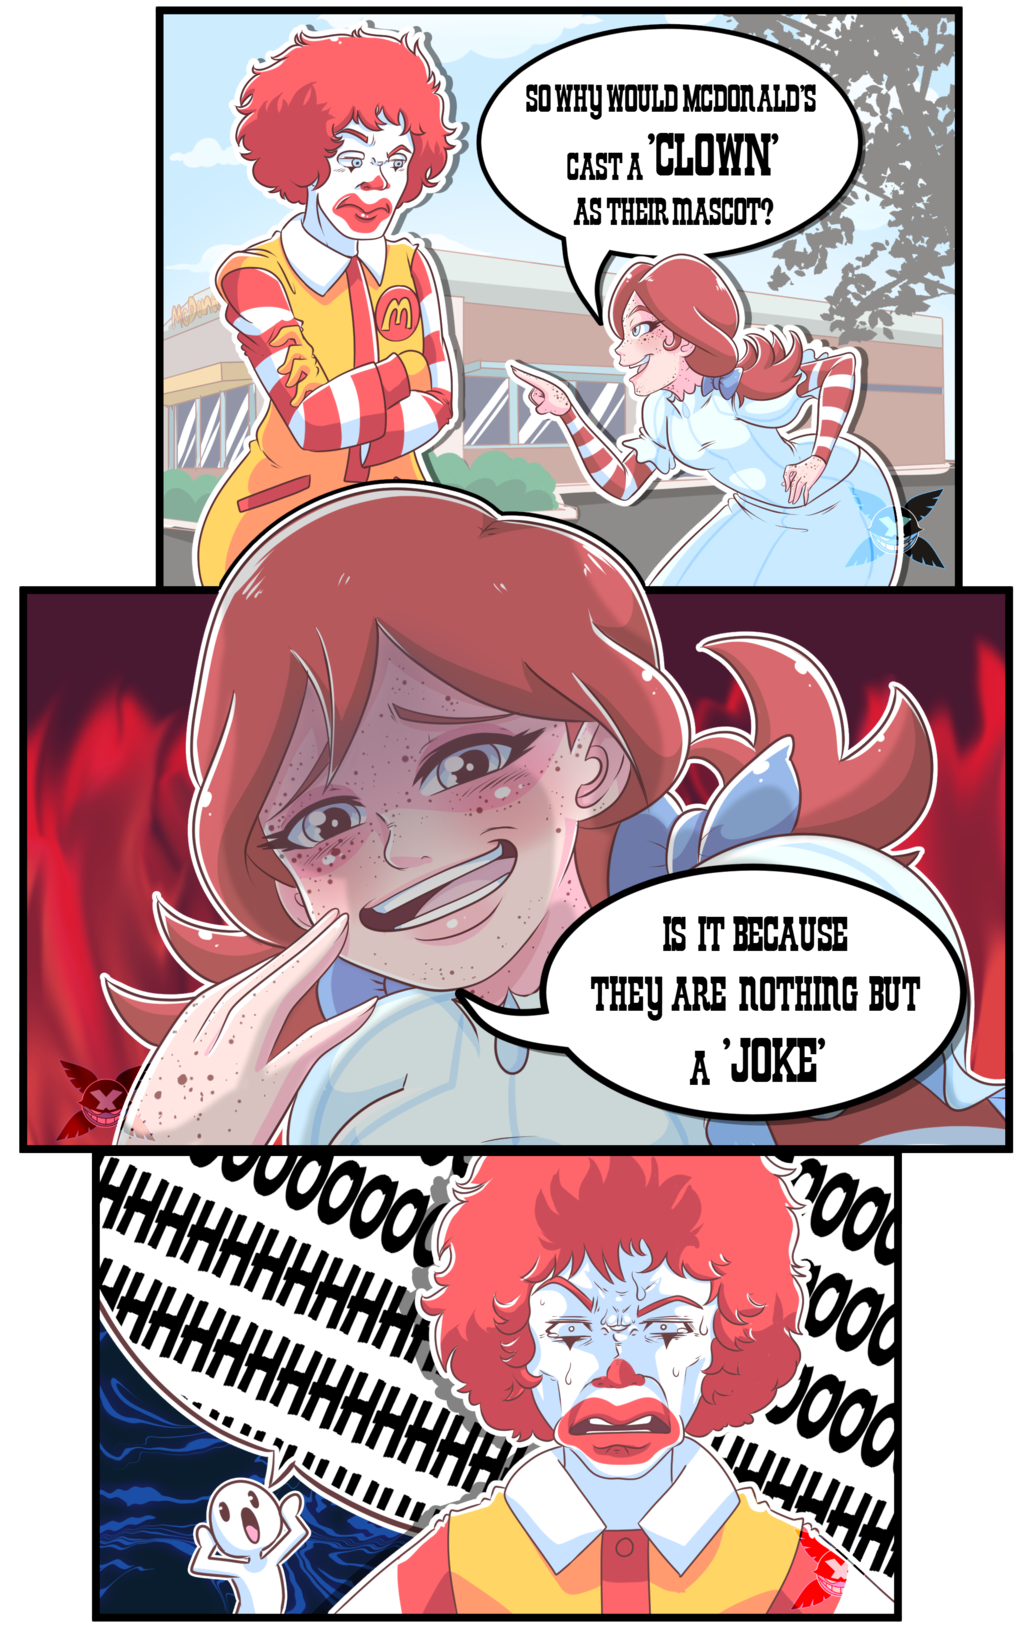 sassy wendy's - So Why Would Mcdonalds Casta Clown As Their Mascot? Is It Because They Are Nothing But A Joke vodooool Hhhhhhhhhhhh Uhuhu